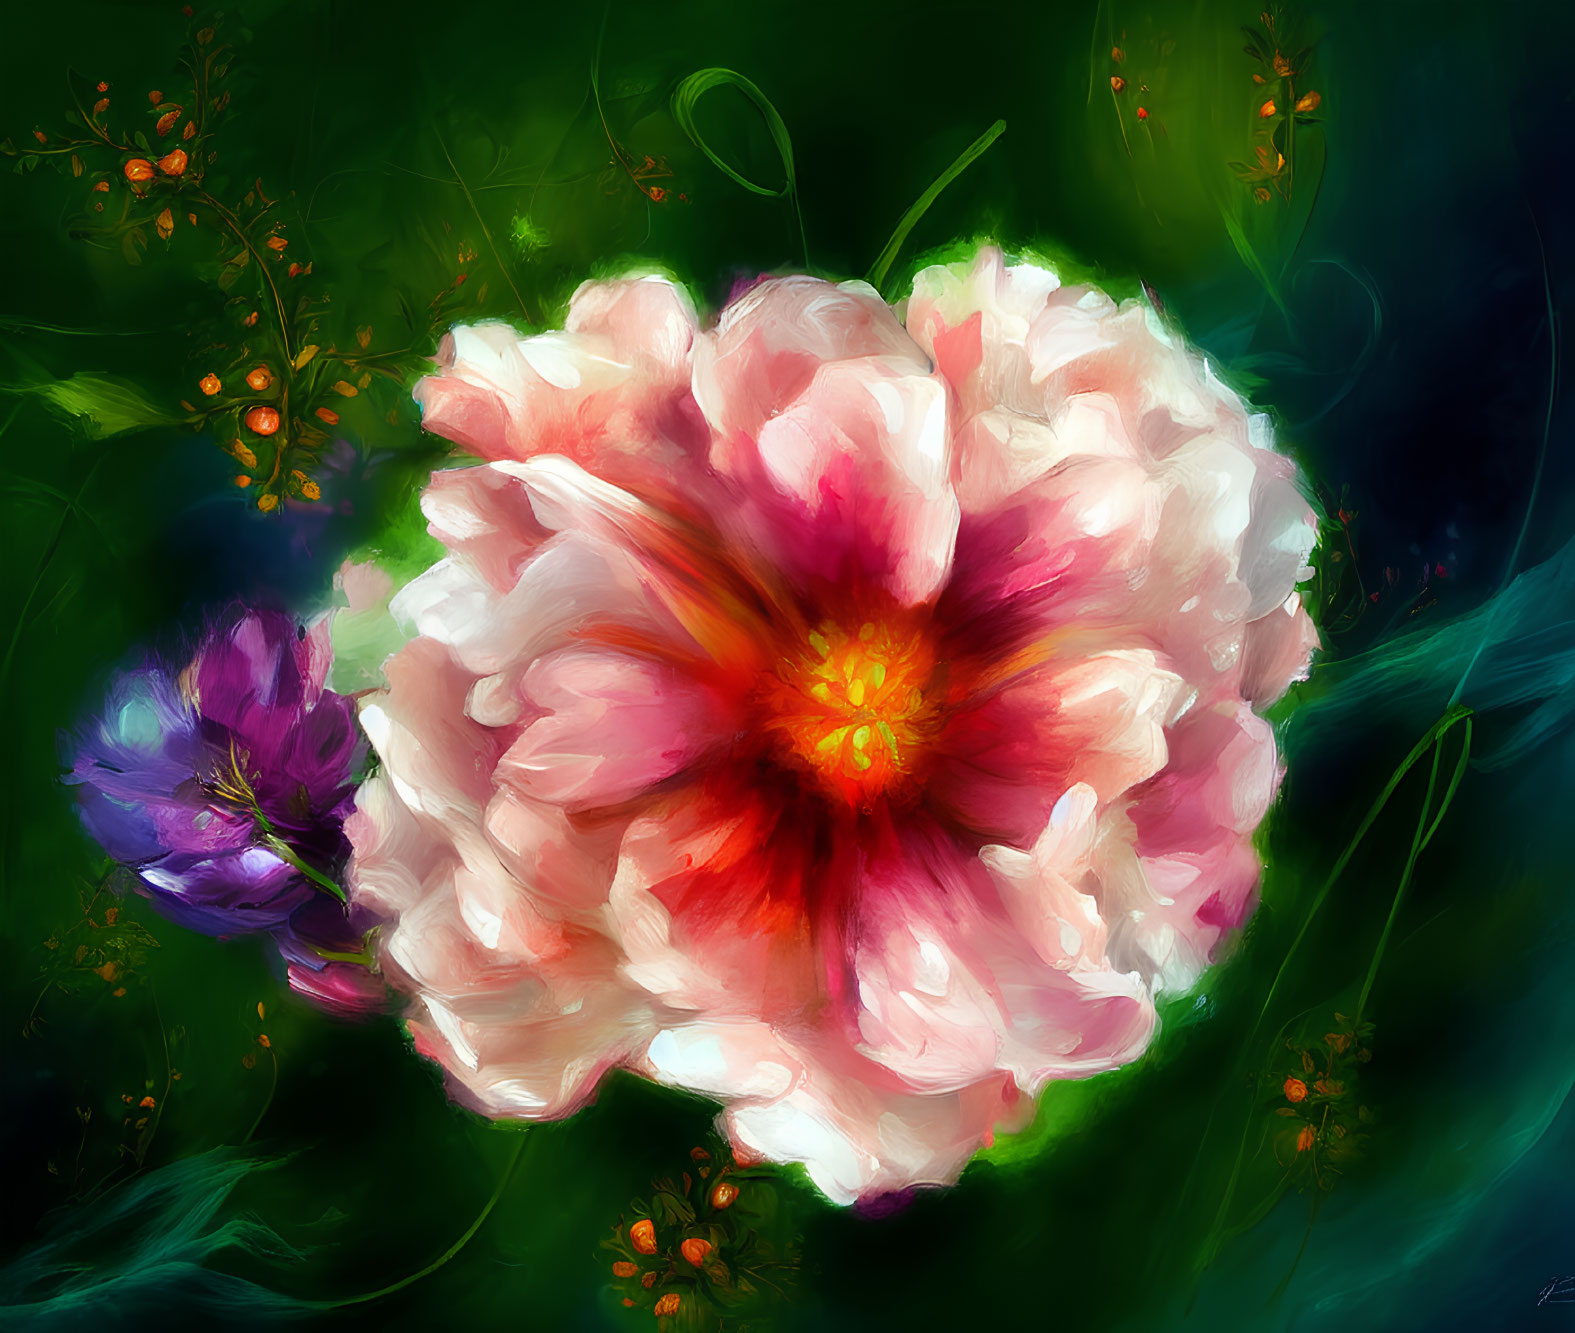 Vibrant blooming flower with luminous center in painterly style